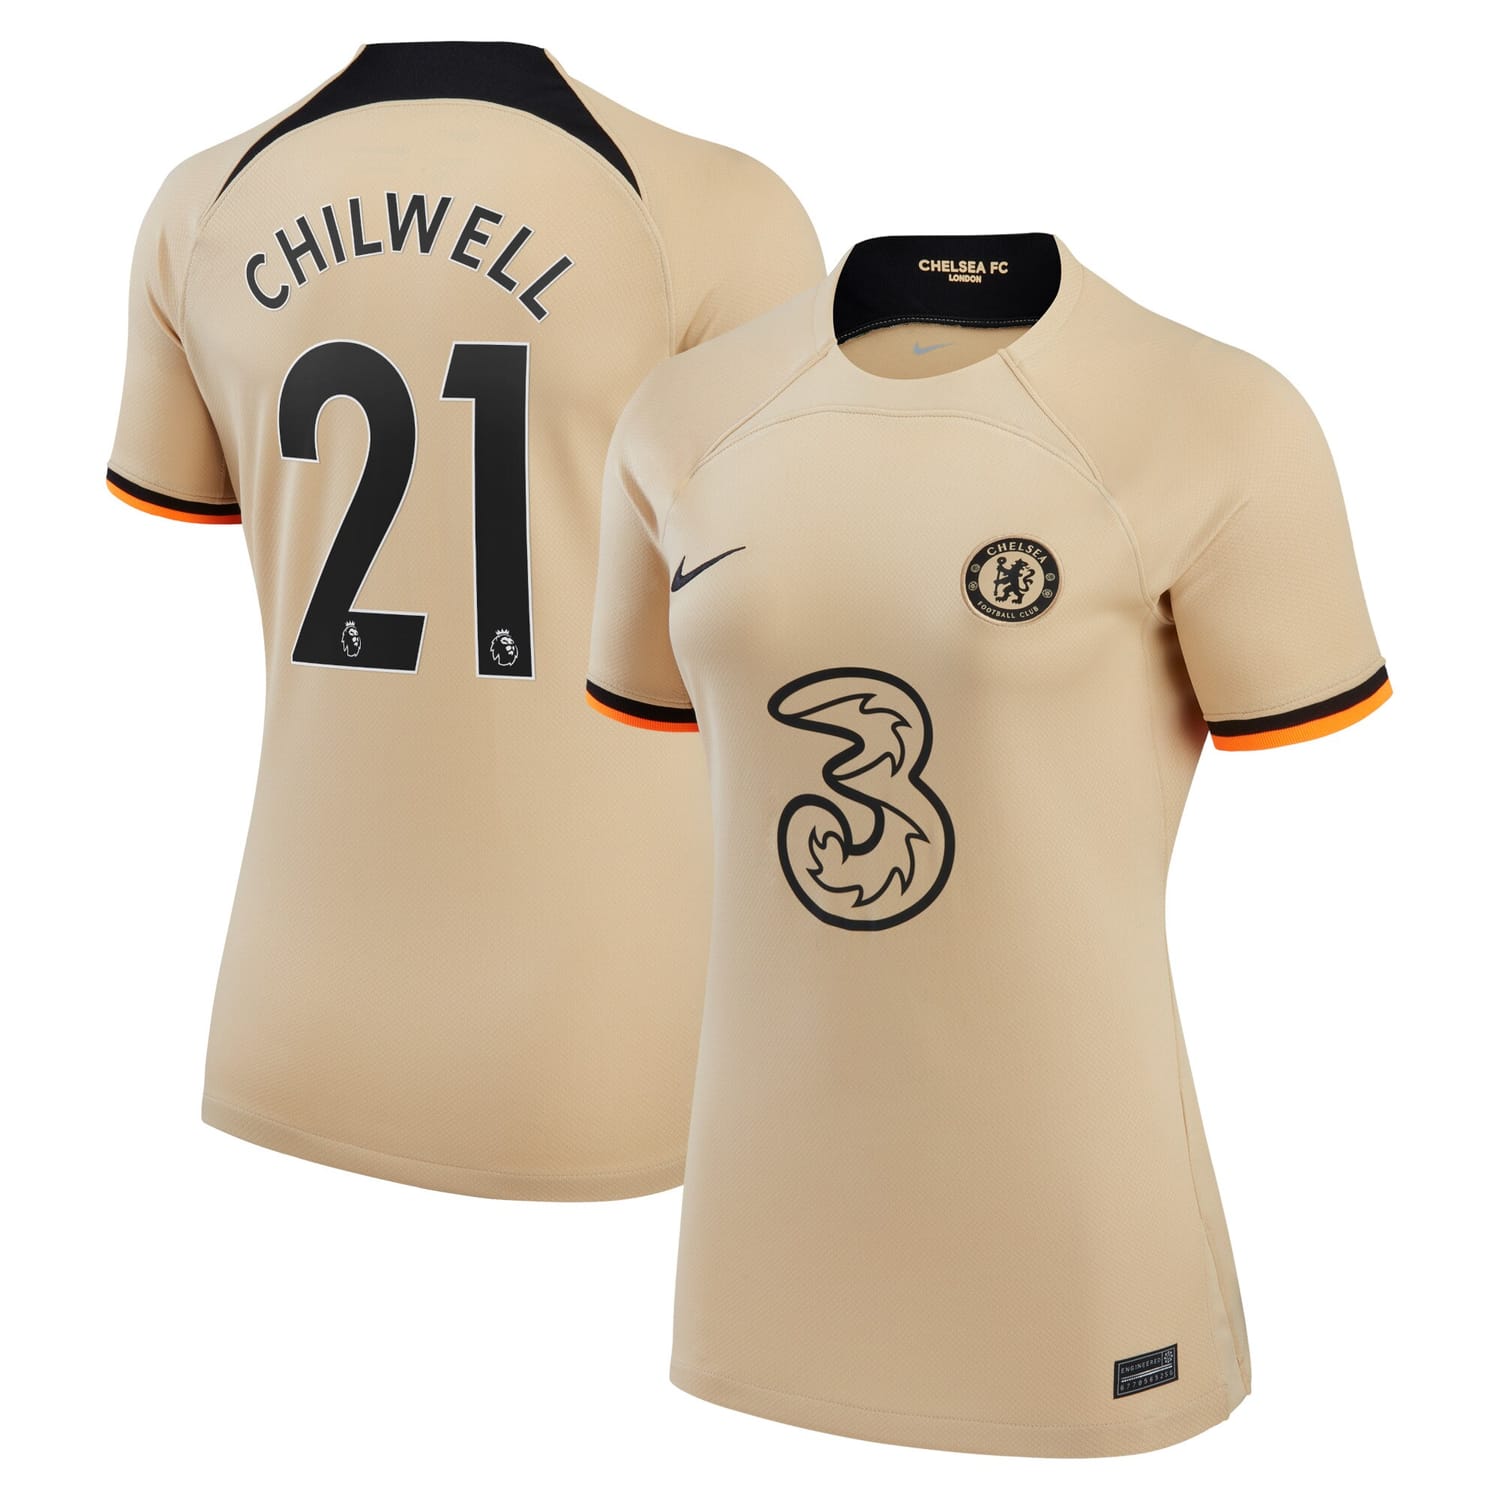 Premier League Chelsea Third Jersey Shirt 2022-23 player Ben Chilwell 21 printing for Women